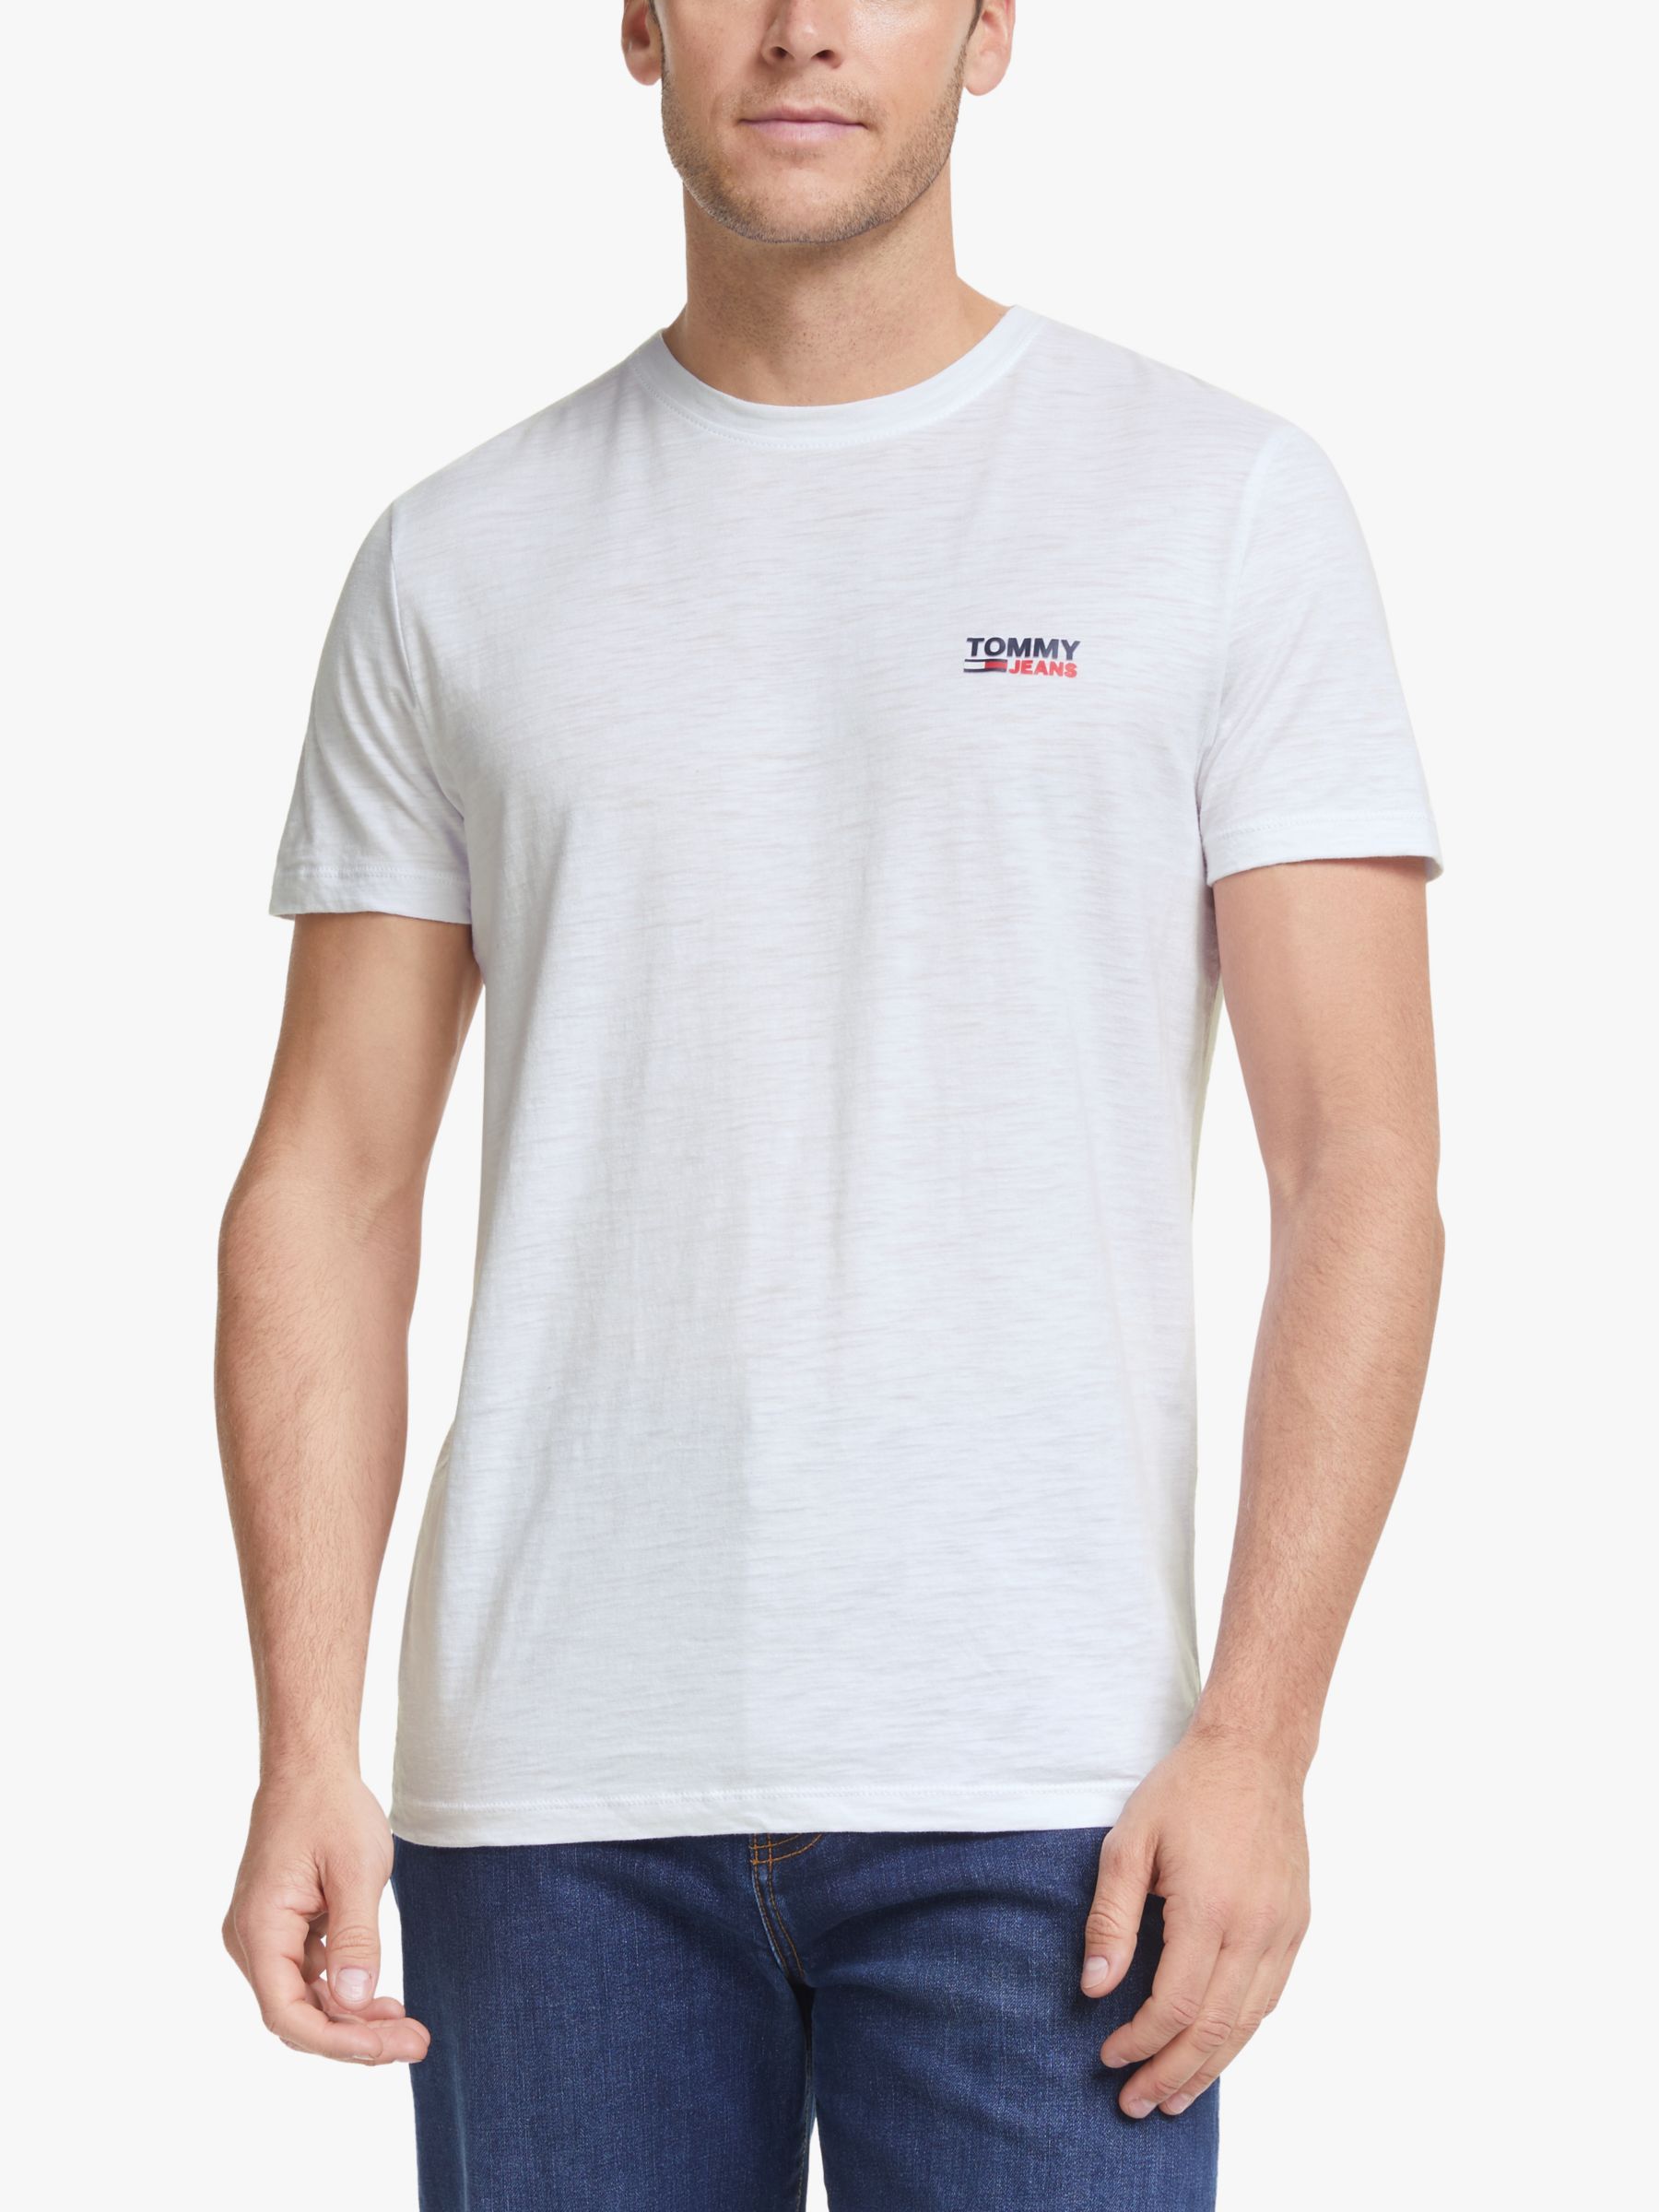 tommy jeans online